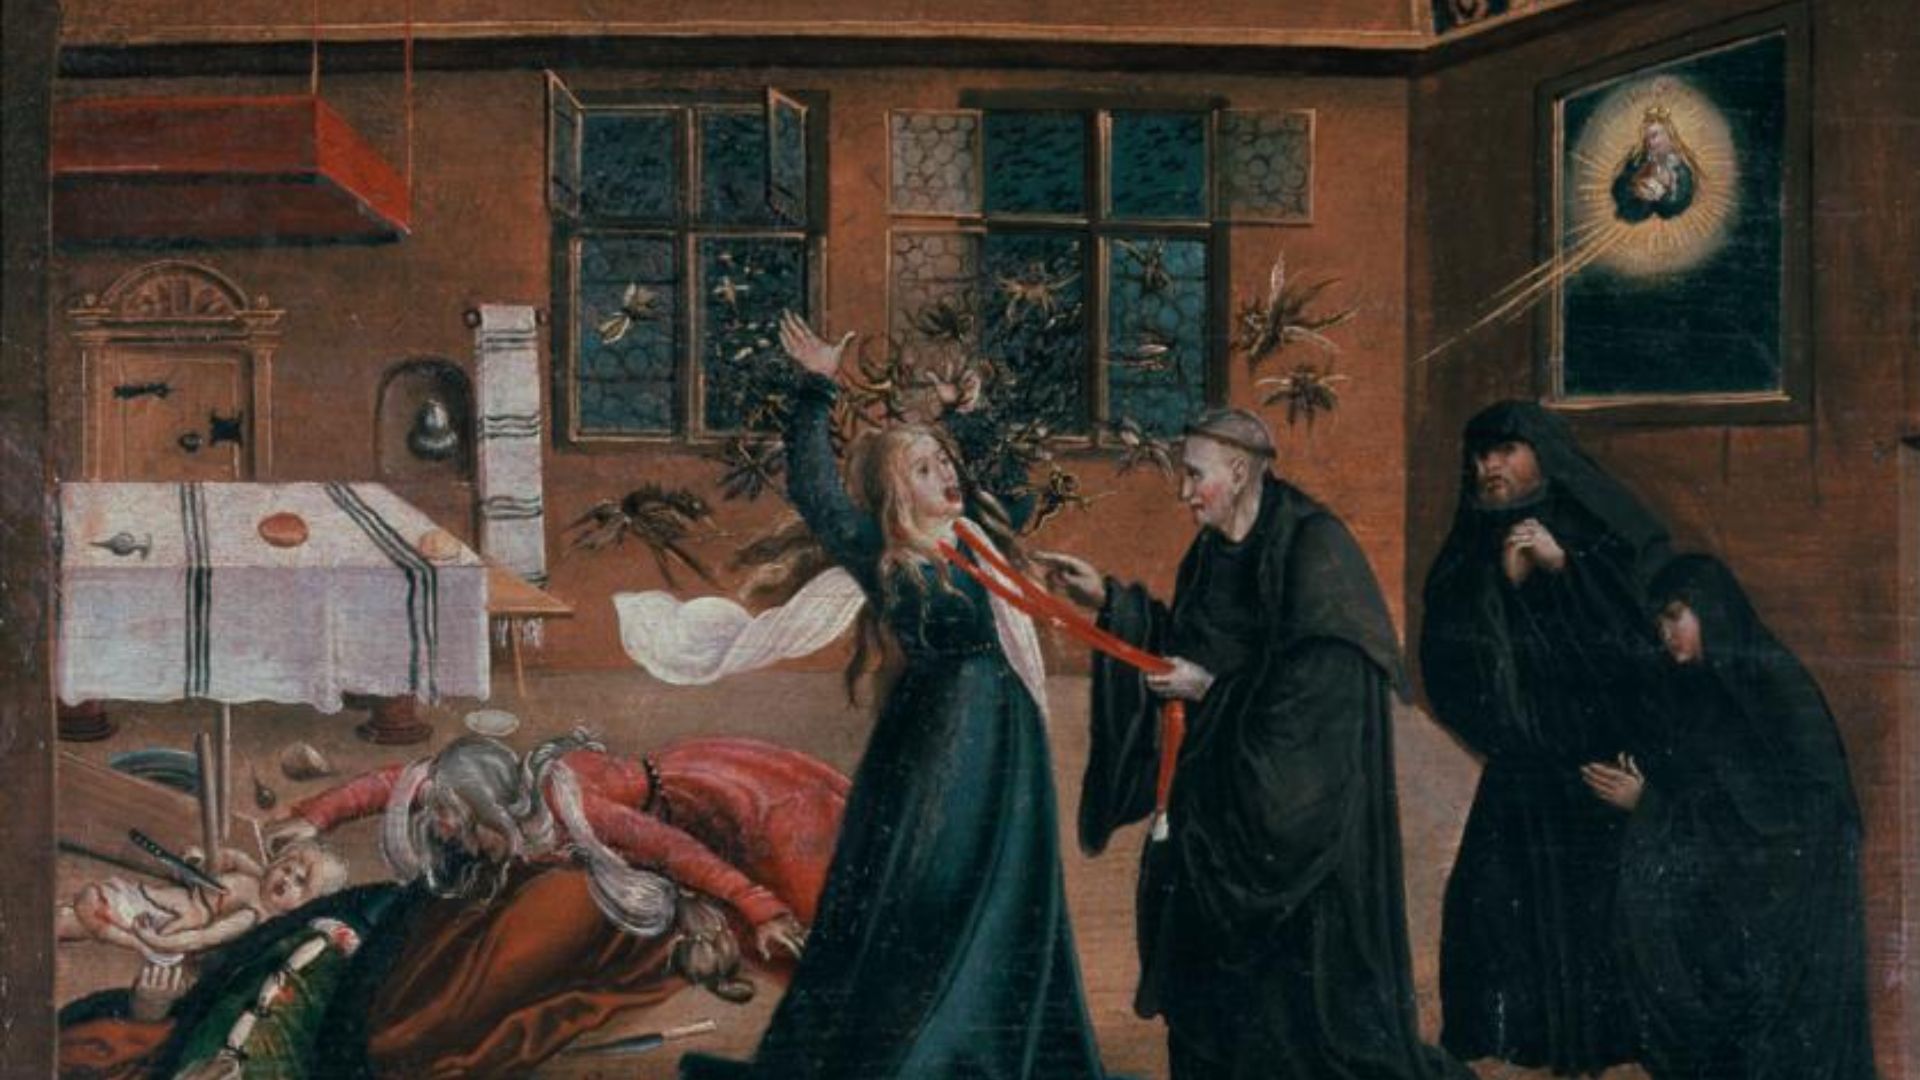 A woman grabbed by the neck with a red slim cloth held by a priest.